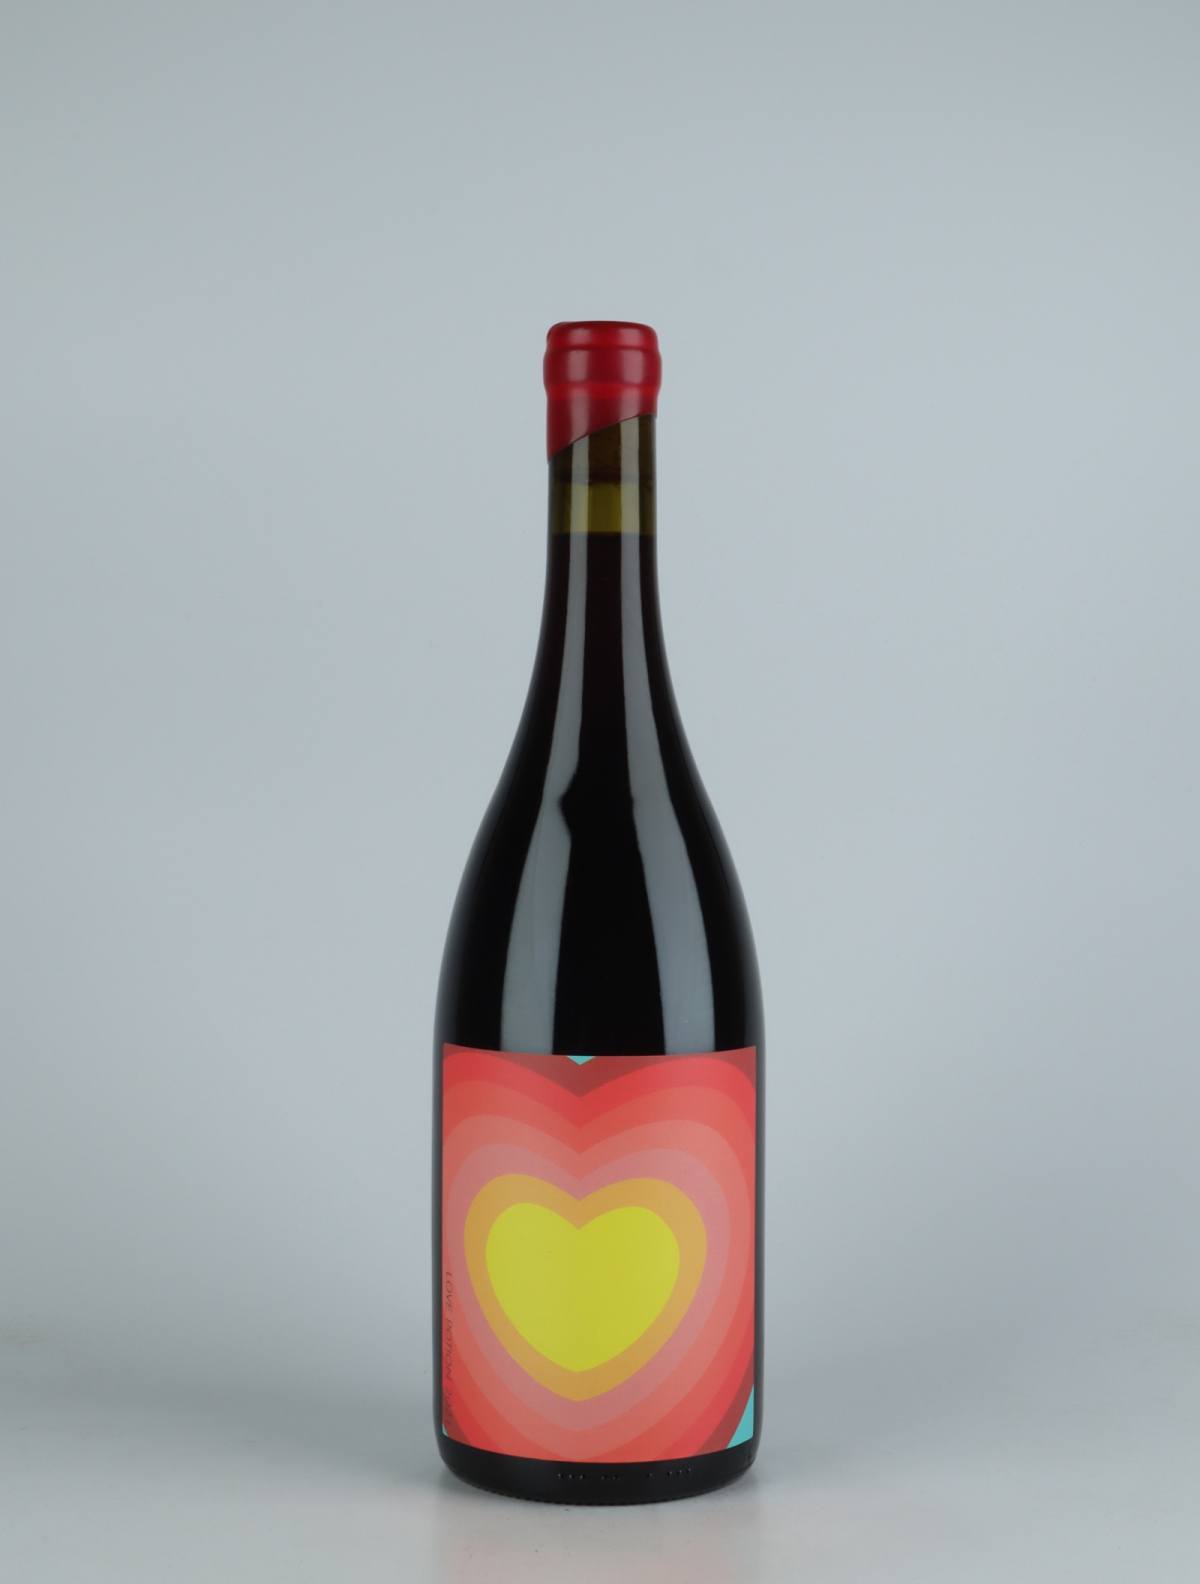 A bottle 2021 Love Potion Red wine from The Other Right, Adelaide Hills in 